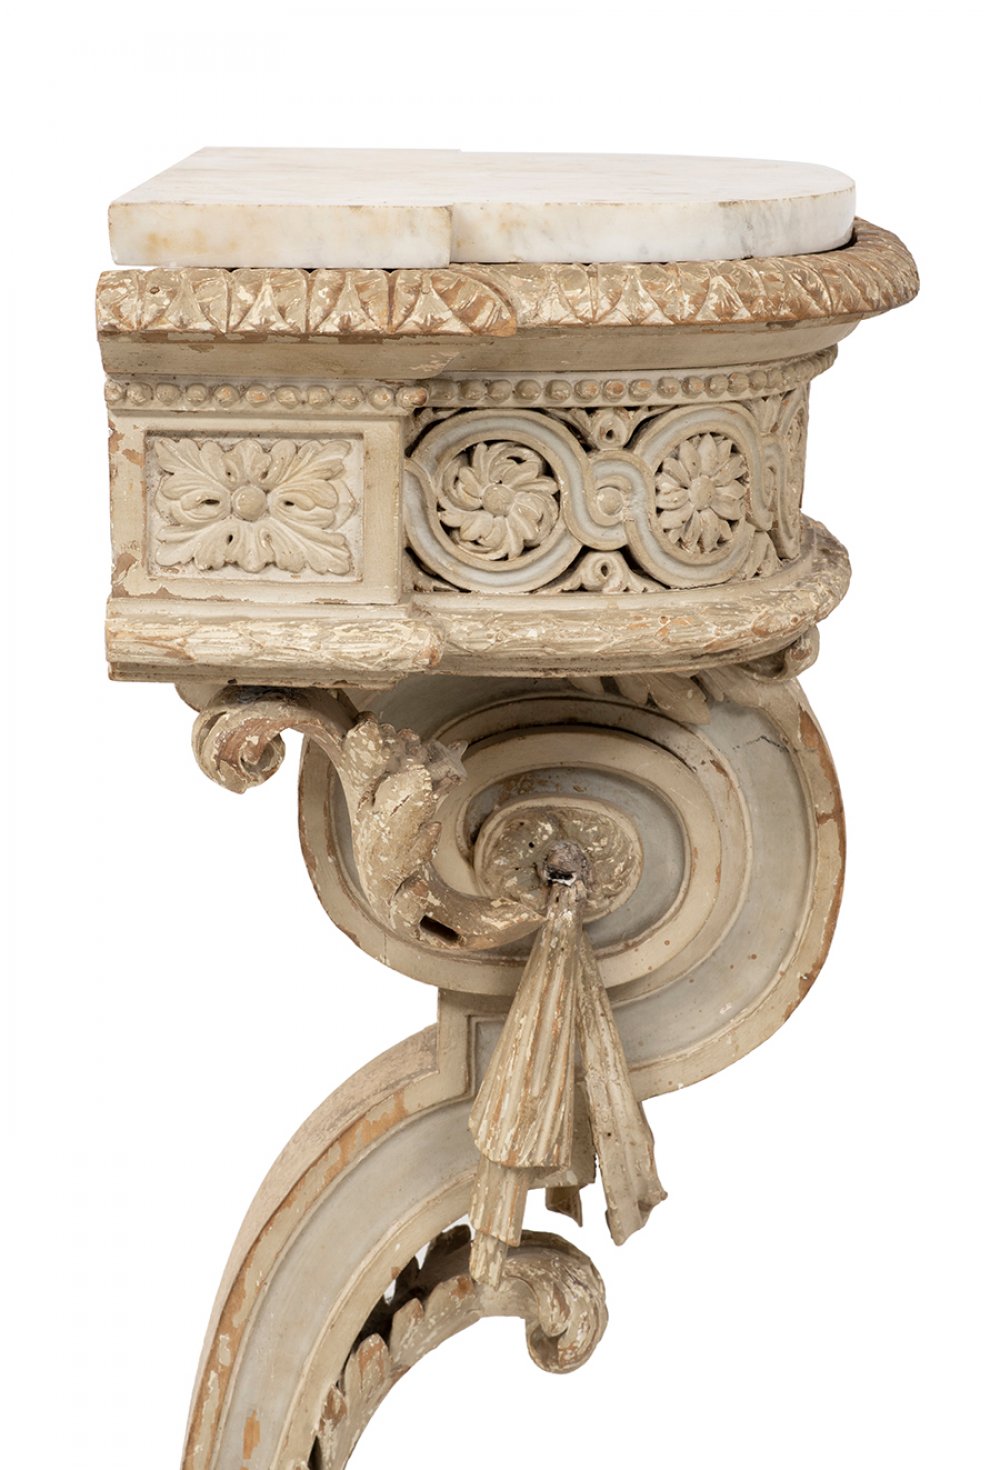 Louis XVI console; France, late 18th century.Carved and polychrome wood. White marble top.It - Image 6 of 6